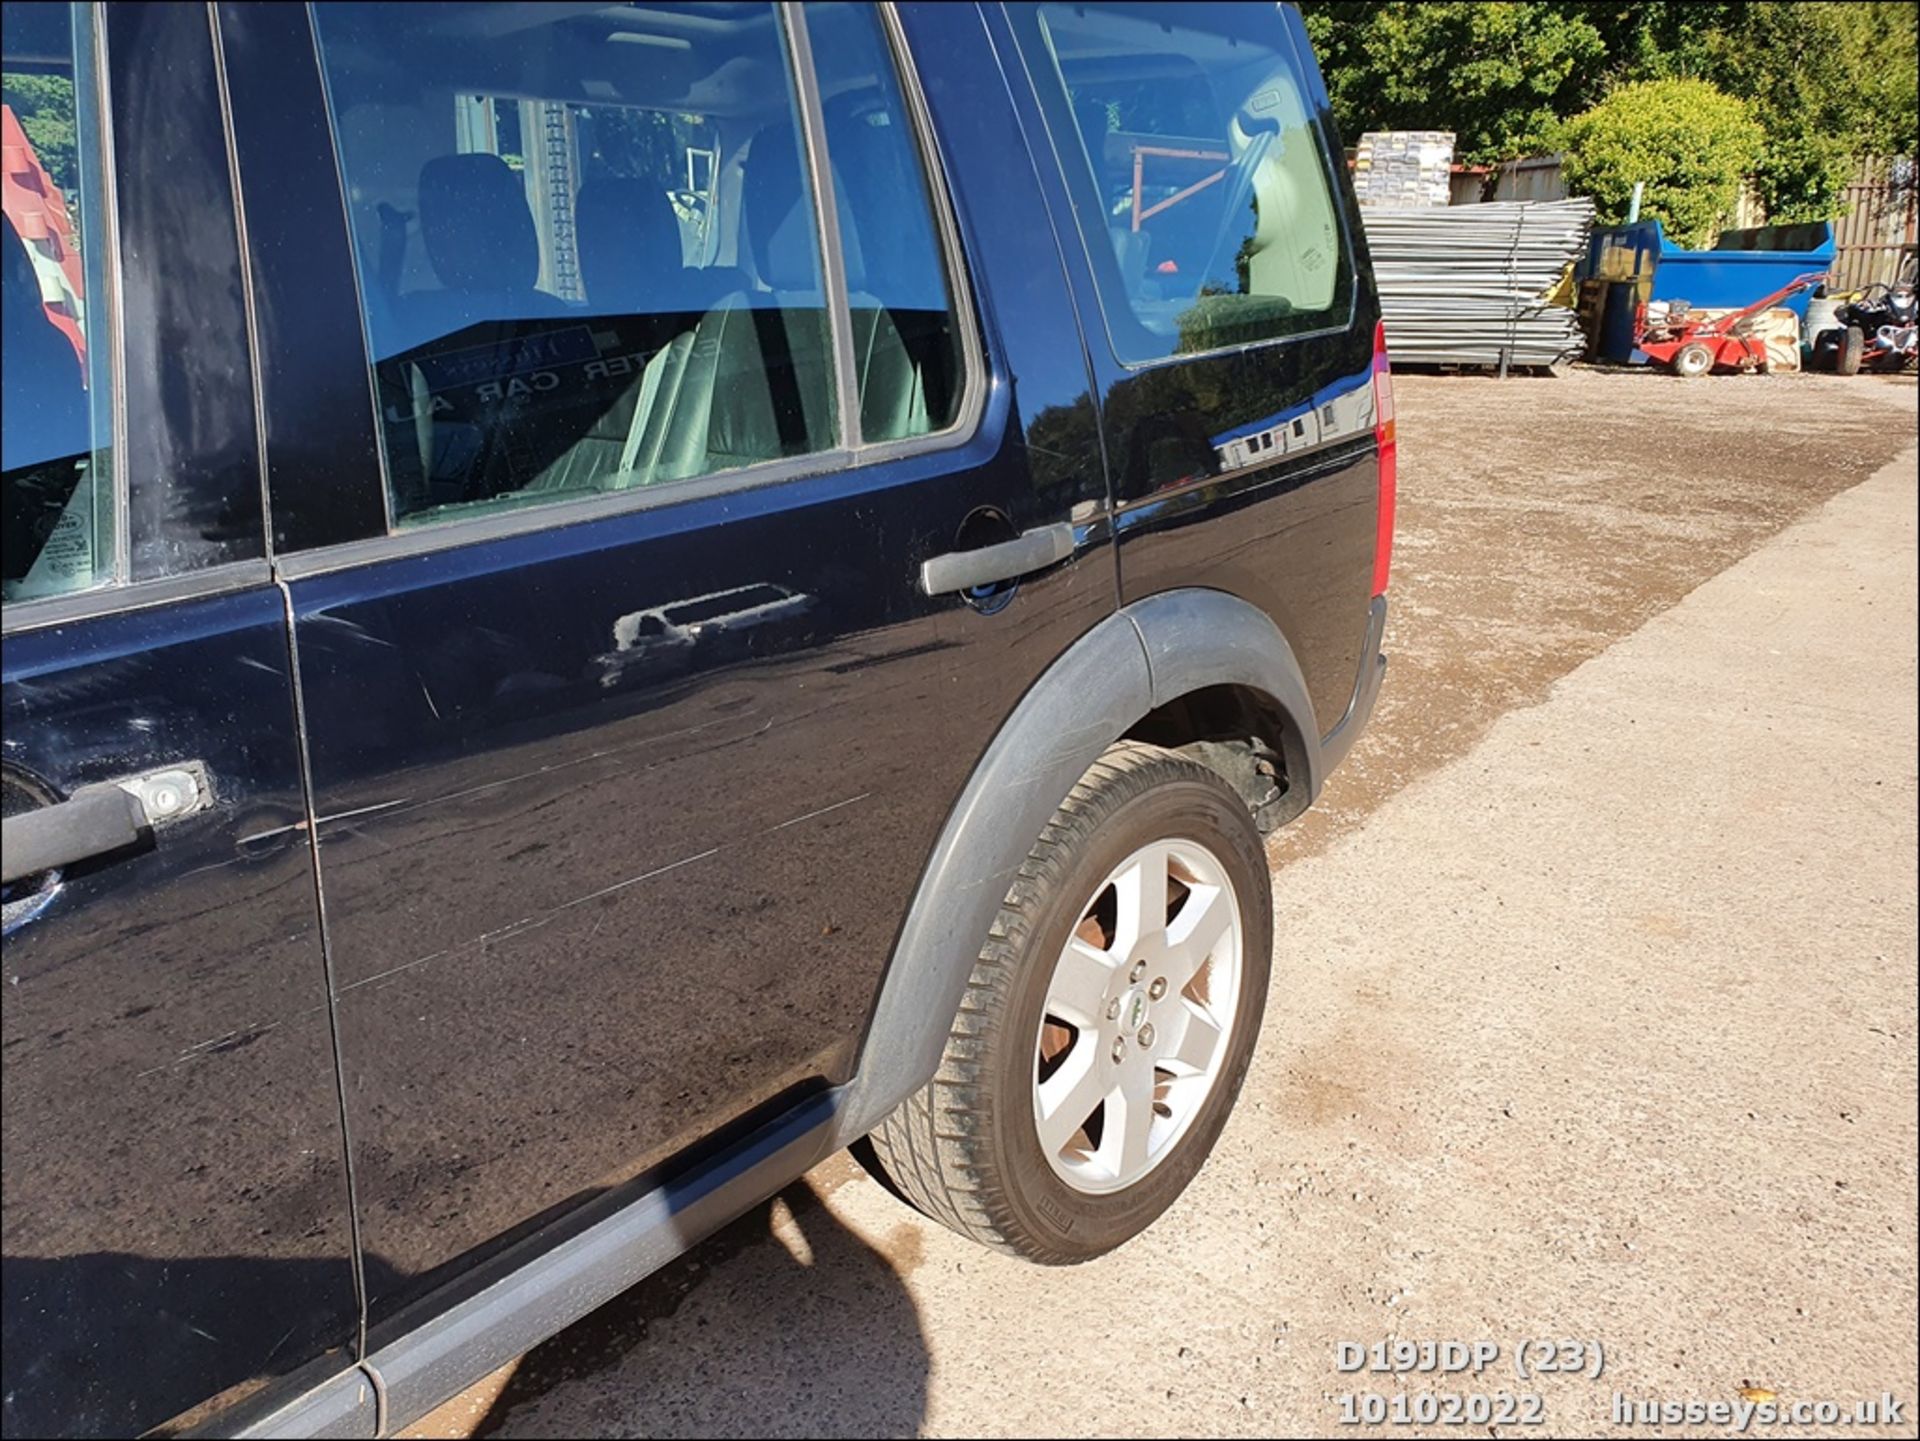 2008 LAND ROVER DISCOVERY TDV6 HSE A - 2720cc 5dr Estate (Blue, 164k) - Image 24 of 36